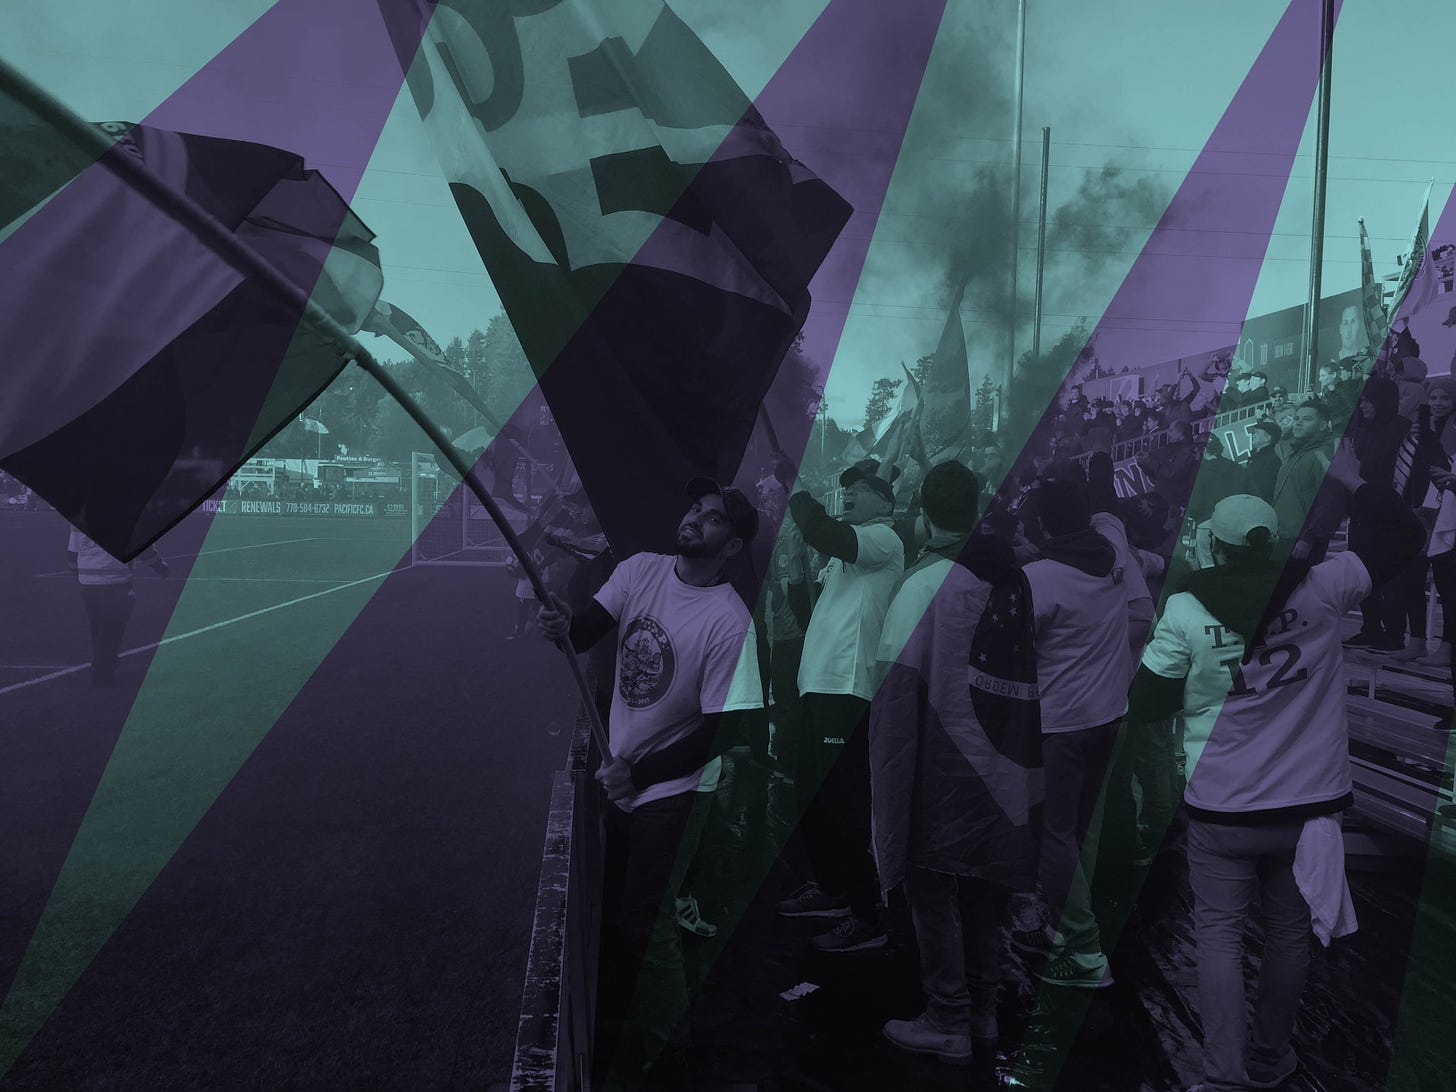 Pacific FC supporters wave flags after the club's victory.